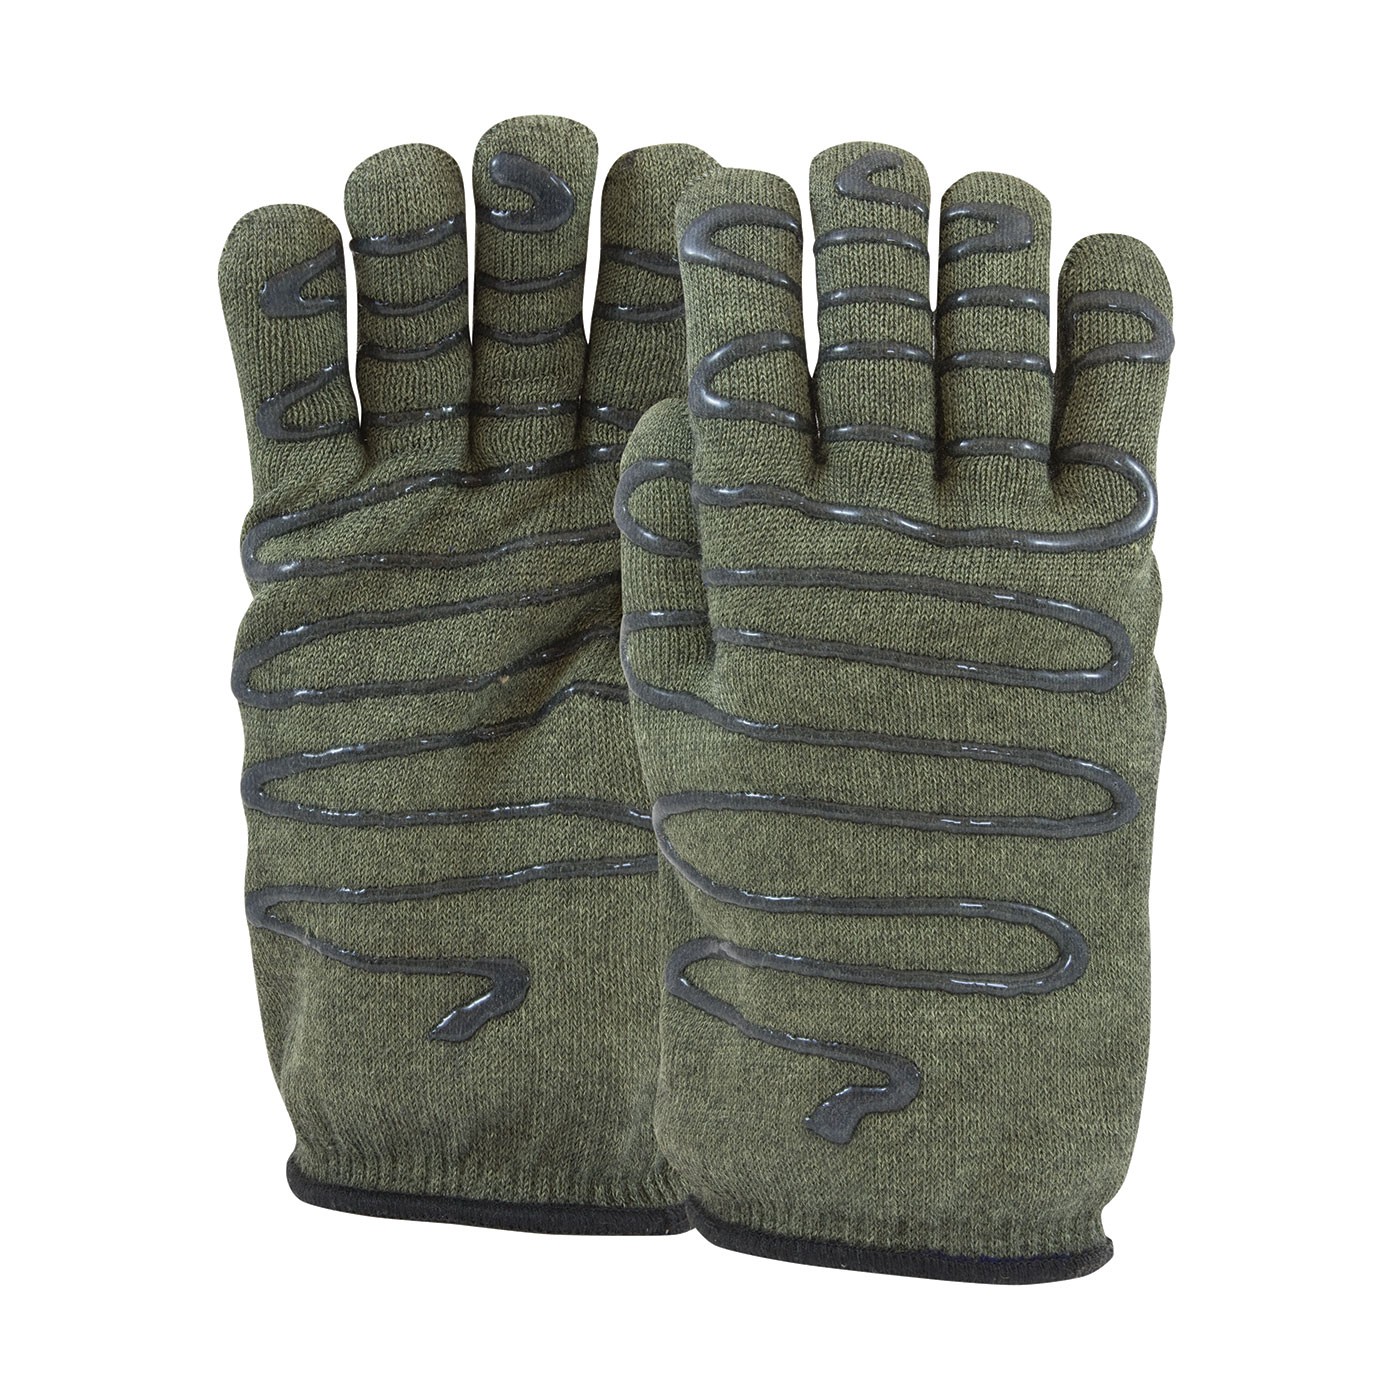 Kut Gard® Kevlar® / Preox Seamless Knit Hot Mill Glove with Terry Cotton Liner and Double-Sided SilaGrip™ Coating - 32 oz  (#43-851)